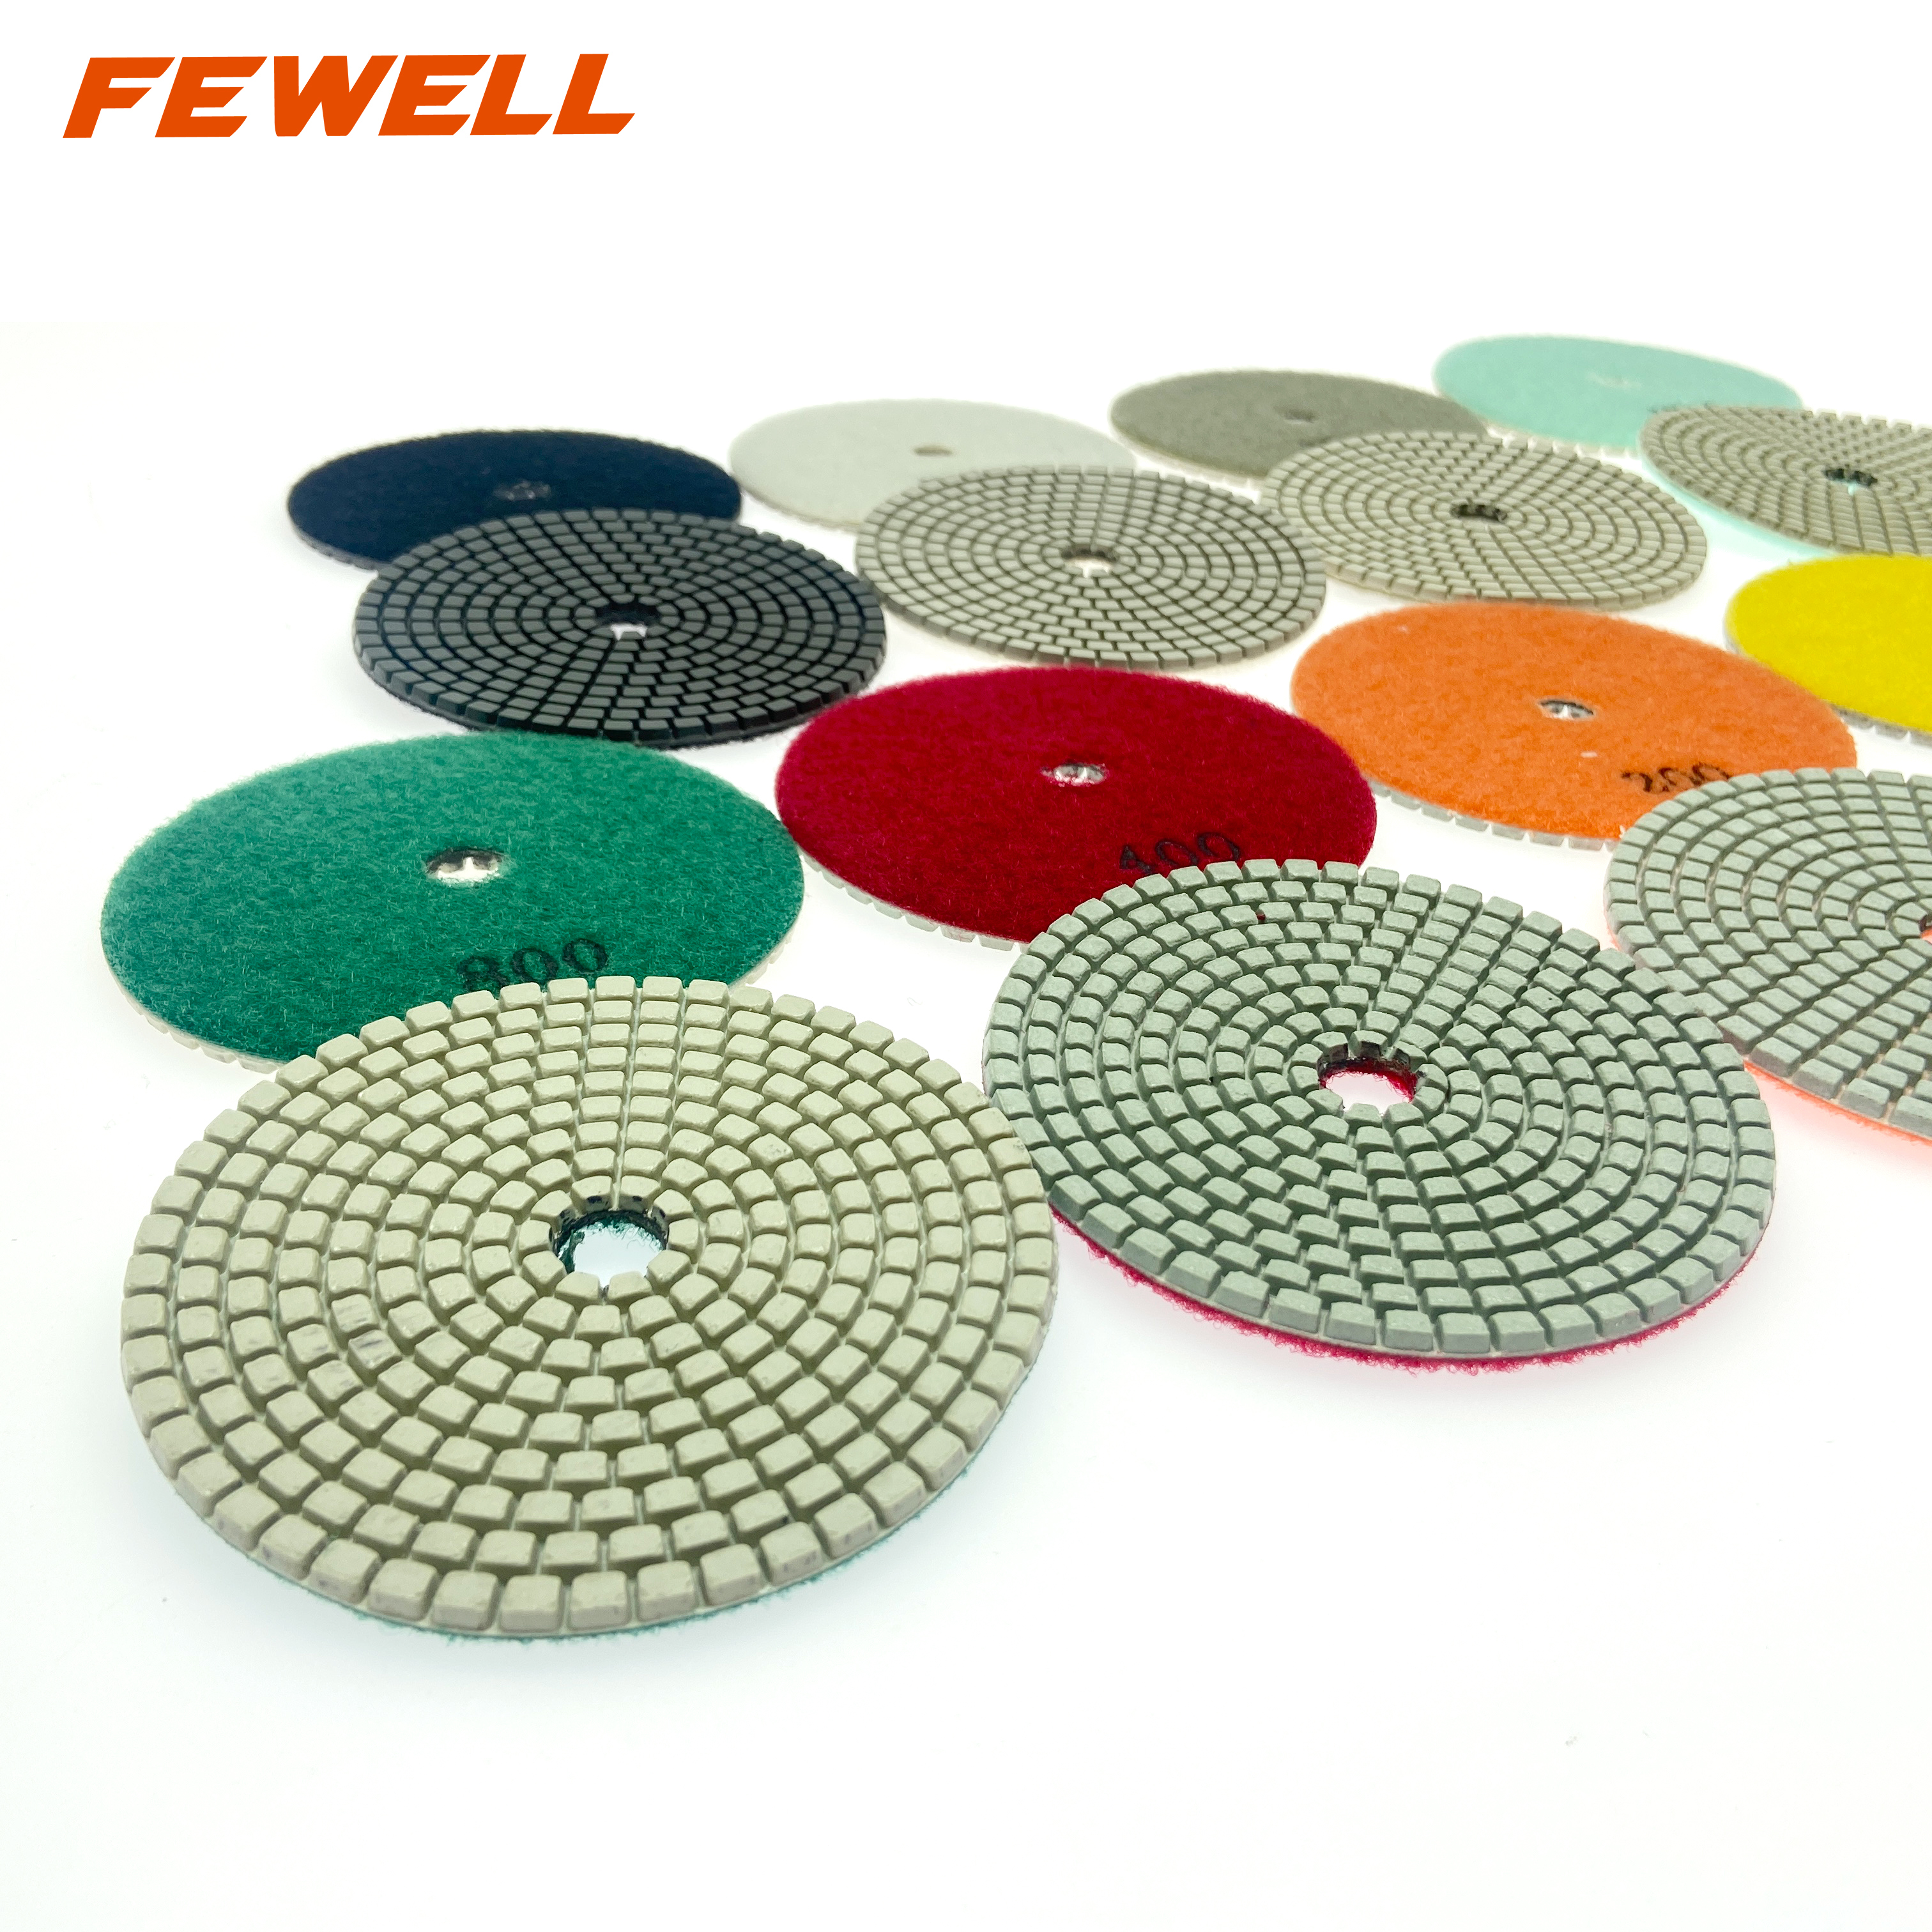 Top quality 4inch 100mm Diamond Dry Grinding Abrasive Pads 9 PCS Sets for Polishing Ceramic Tiles Granite Marble Concrete